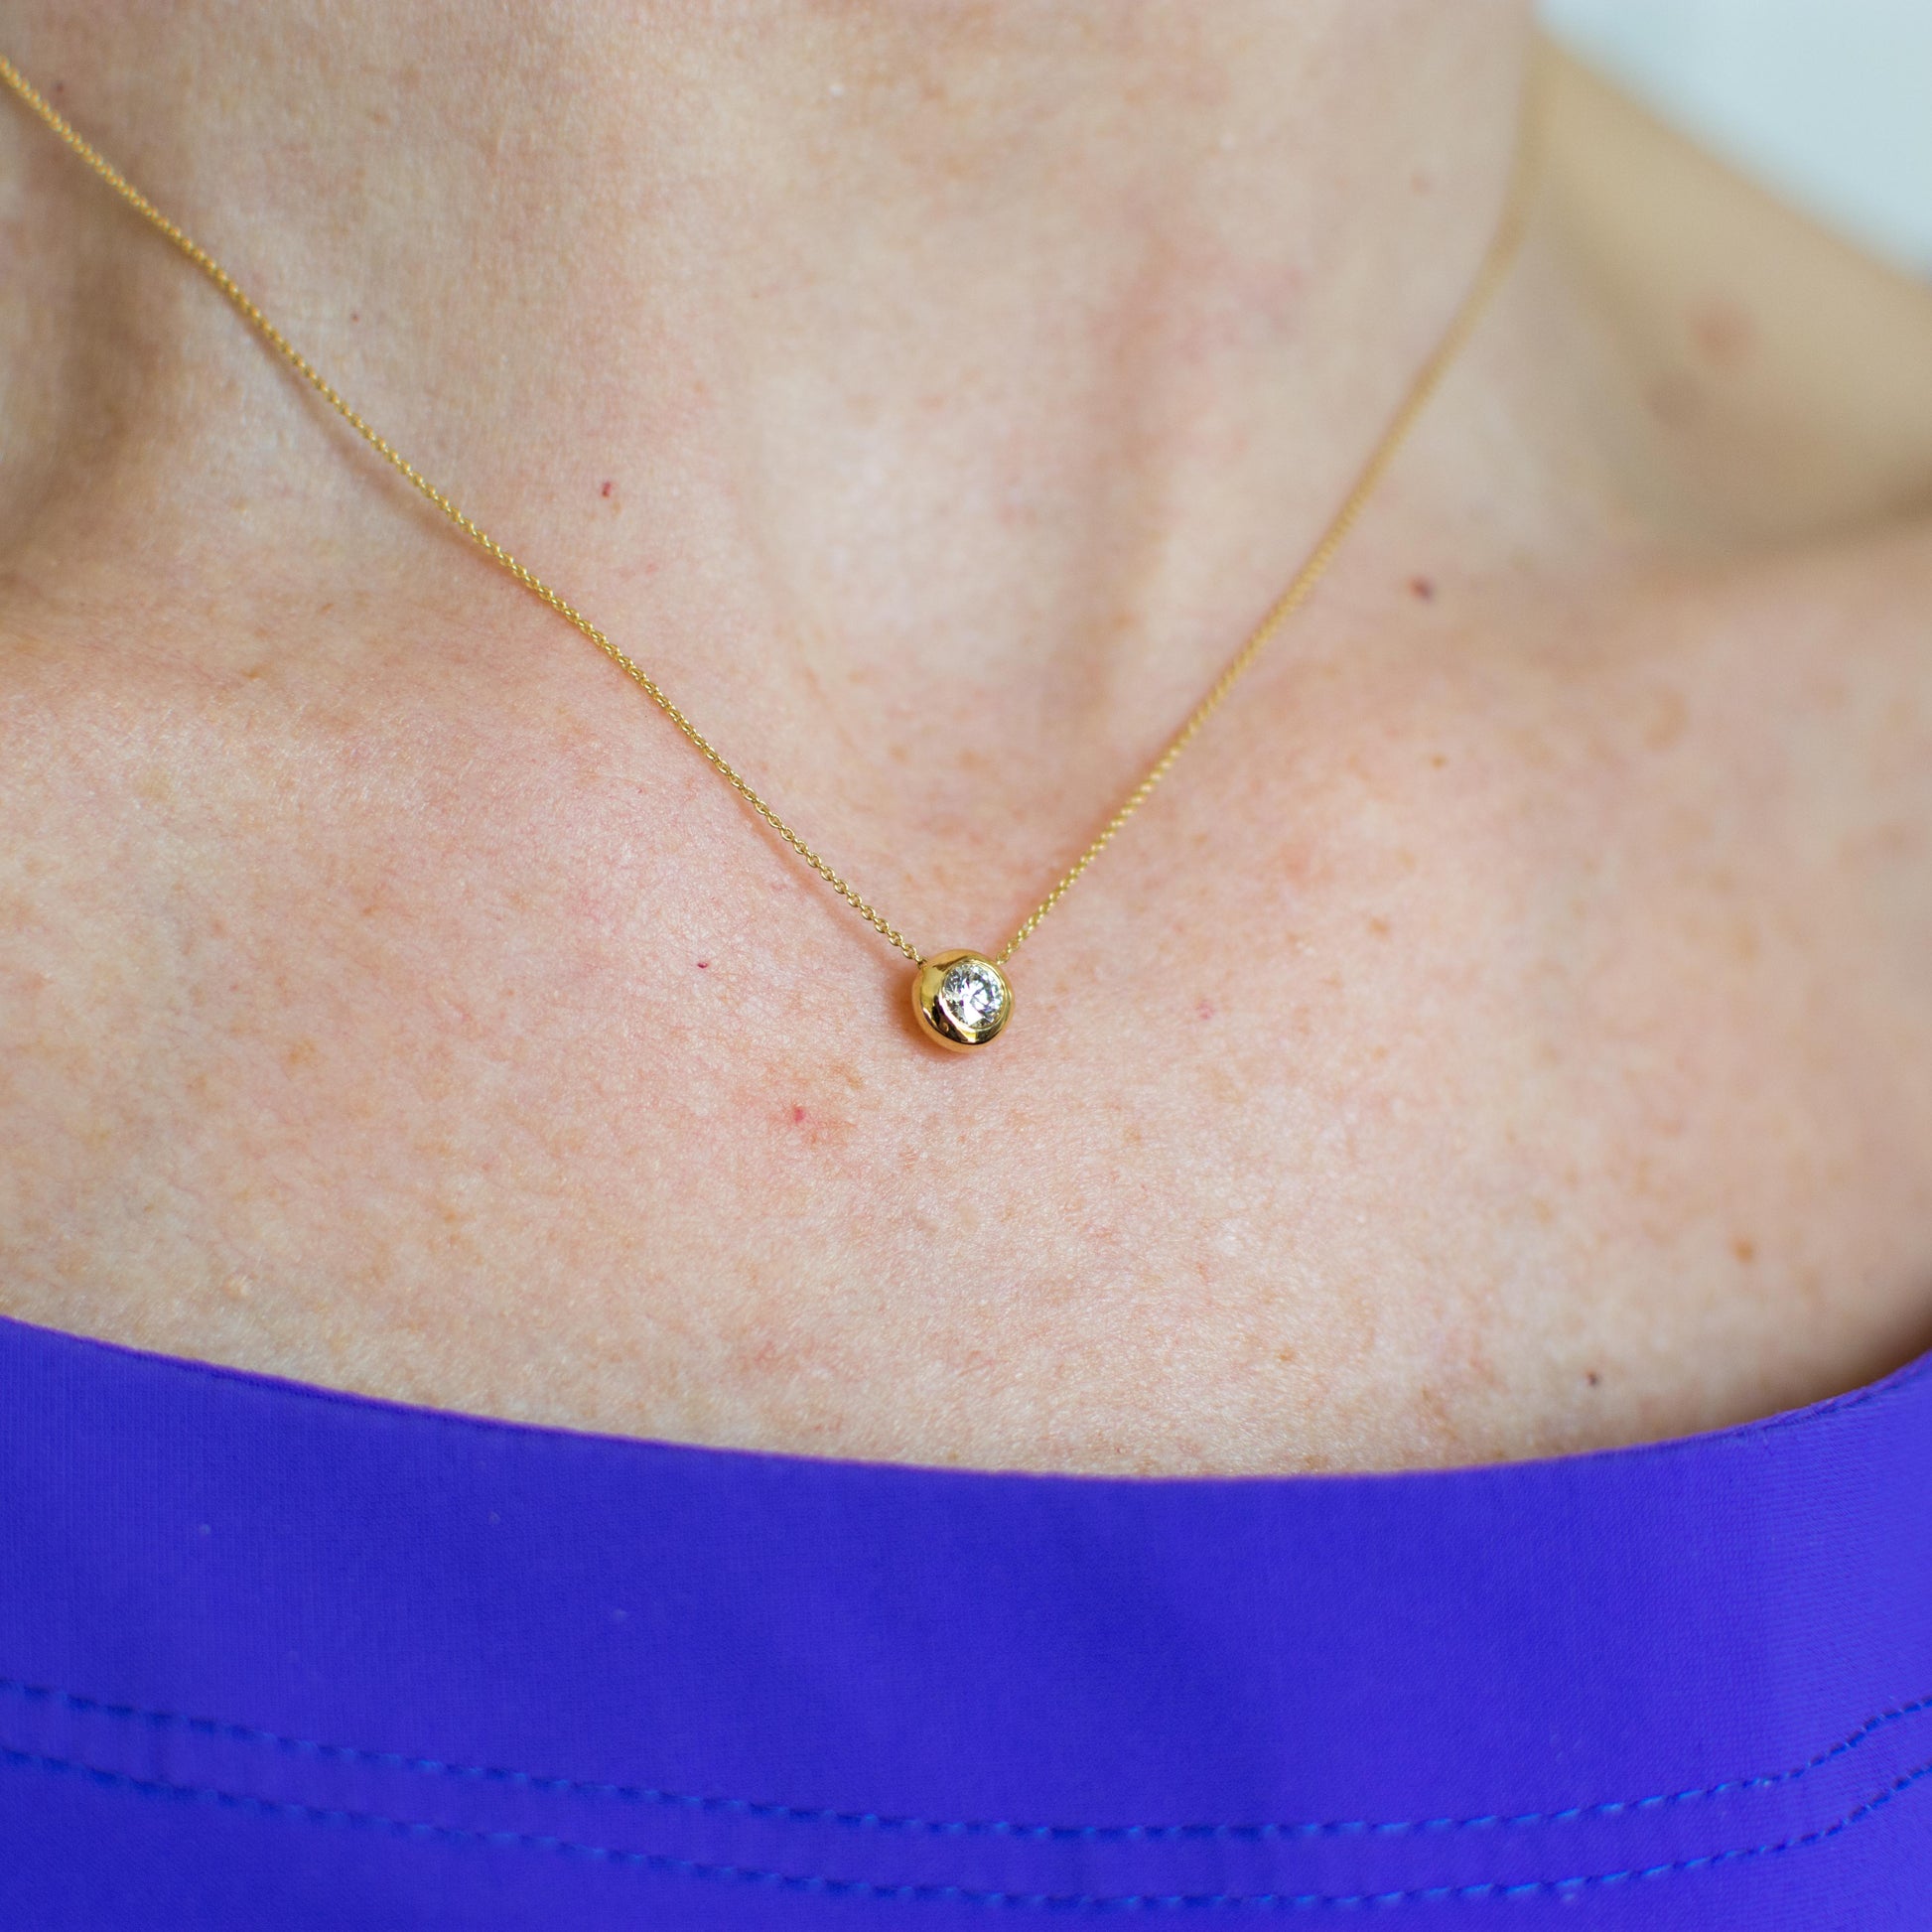 This is a gorgeous classic necklace, ideal for everyday wear.  A single round brilliant cut diamond, bezel set 6mm x 6mm.  0.14ct approximately.  18ct yellow gold.  The chain passes through the pendant.  16-18 inch long adjustable 18ct yellow gold fine trace chain with lobster clasp.